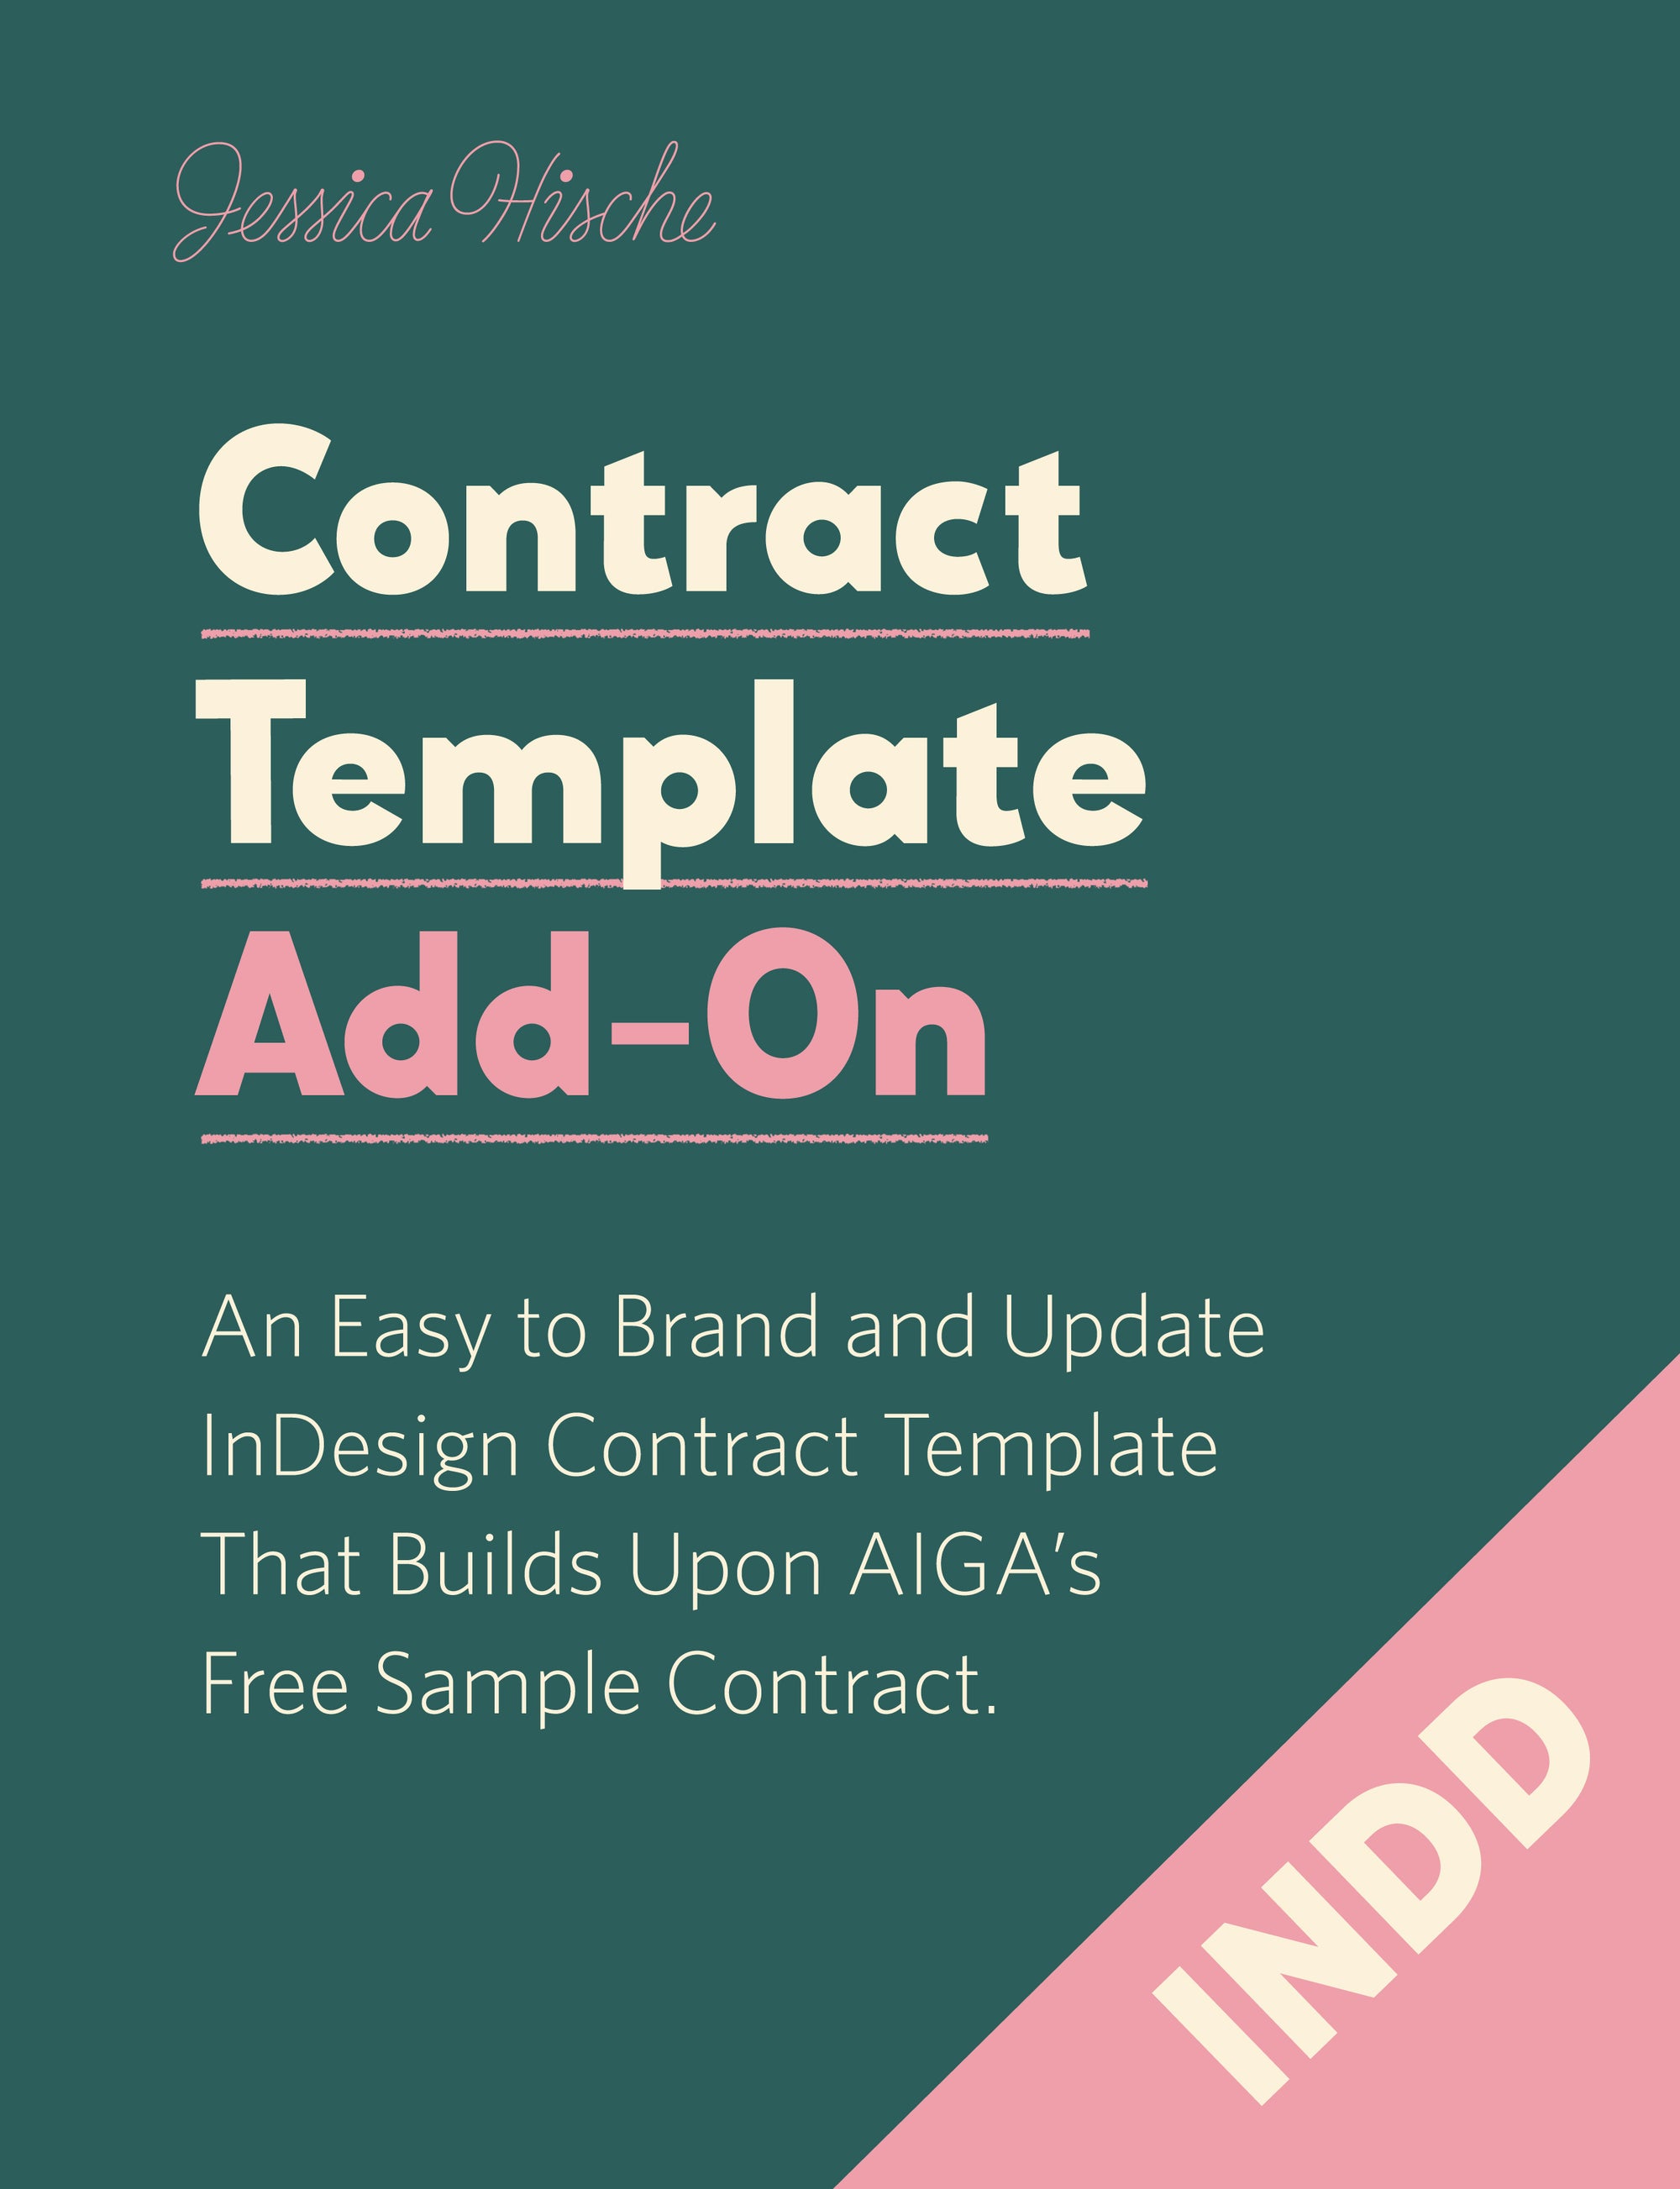 Contract Template Add-On